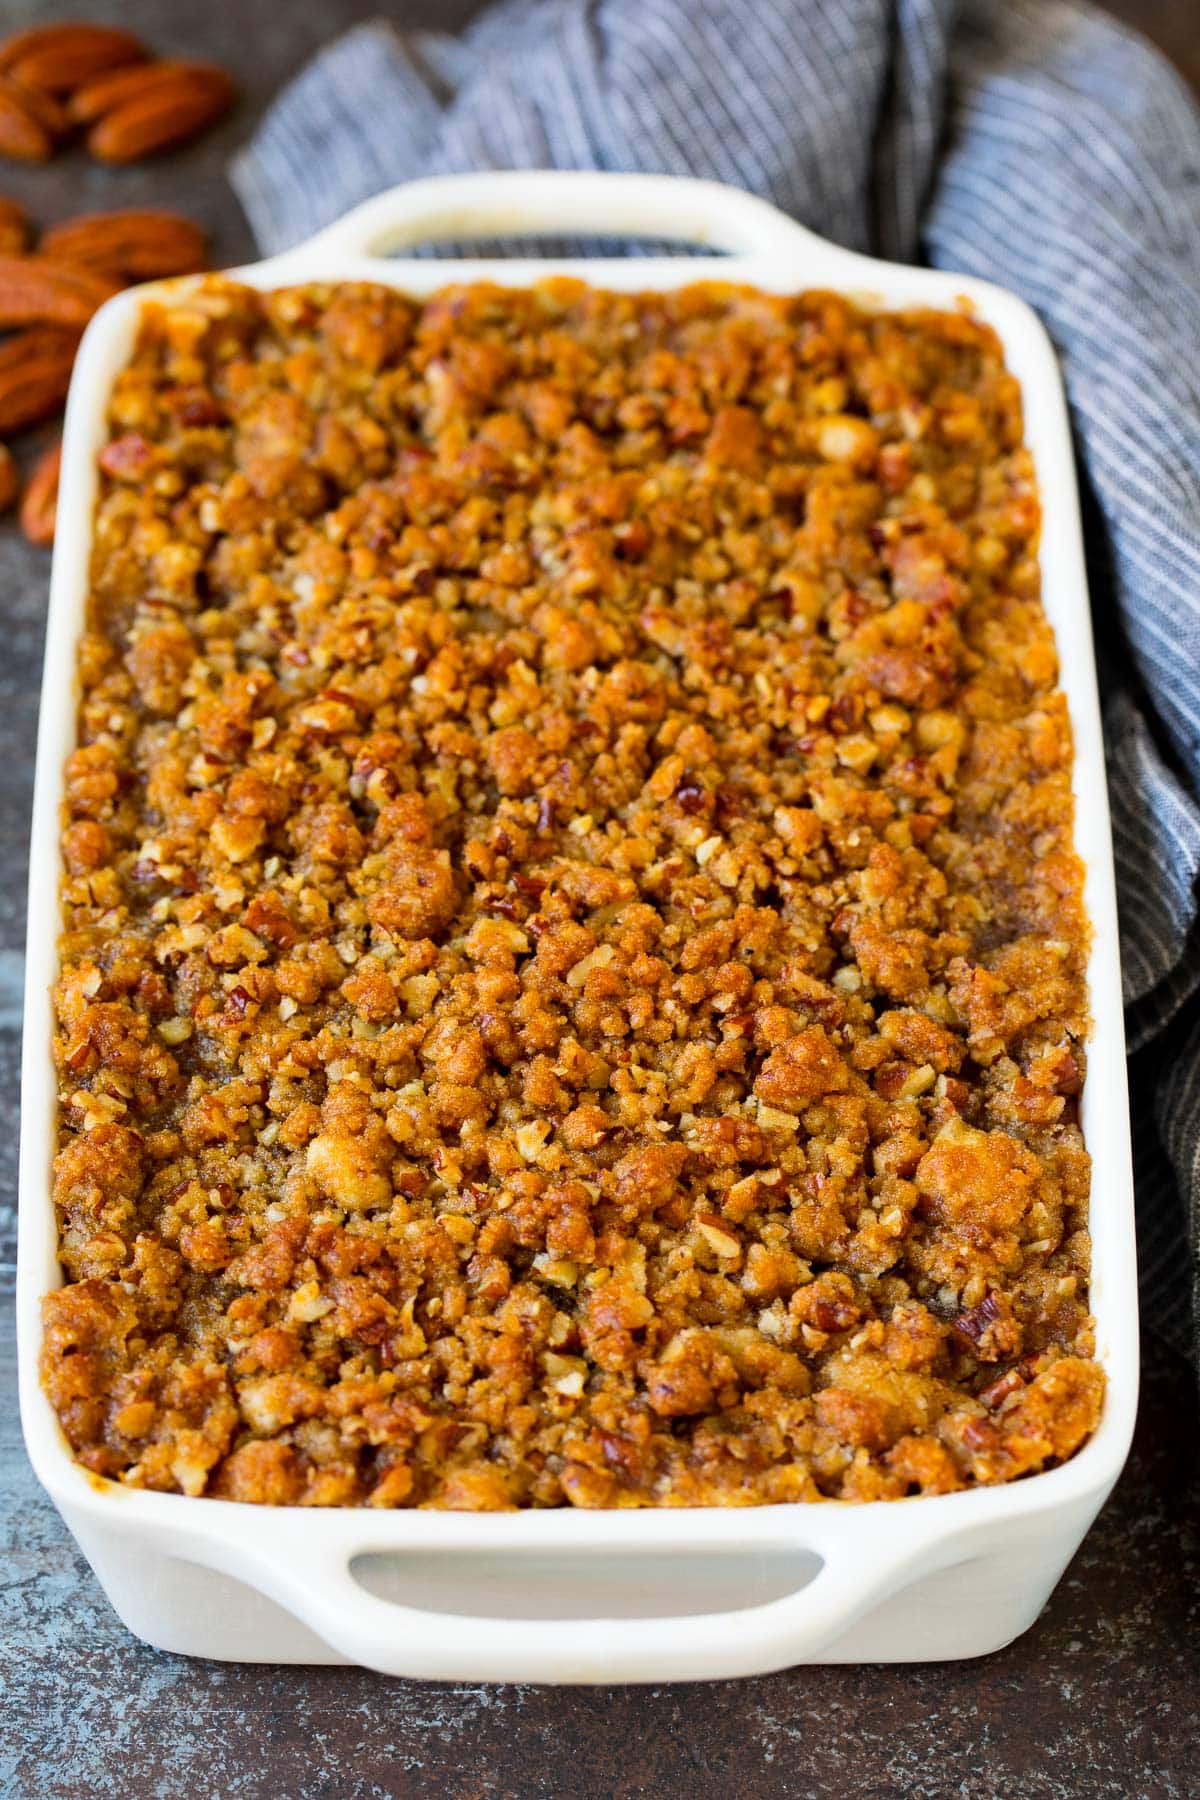 A baked sweet potato souffle with pecan topping.